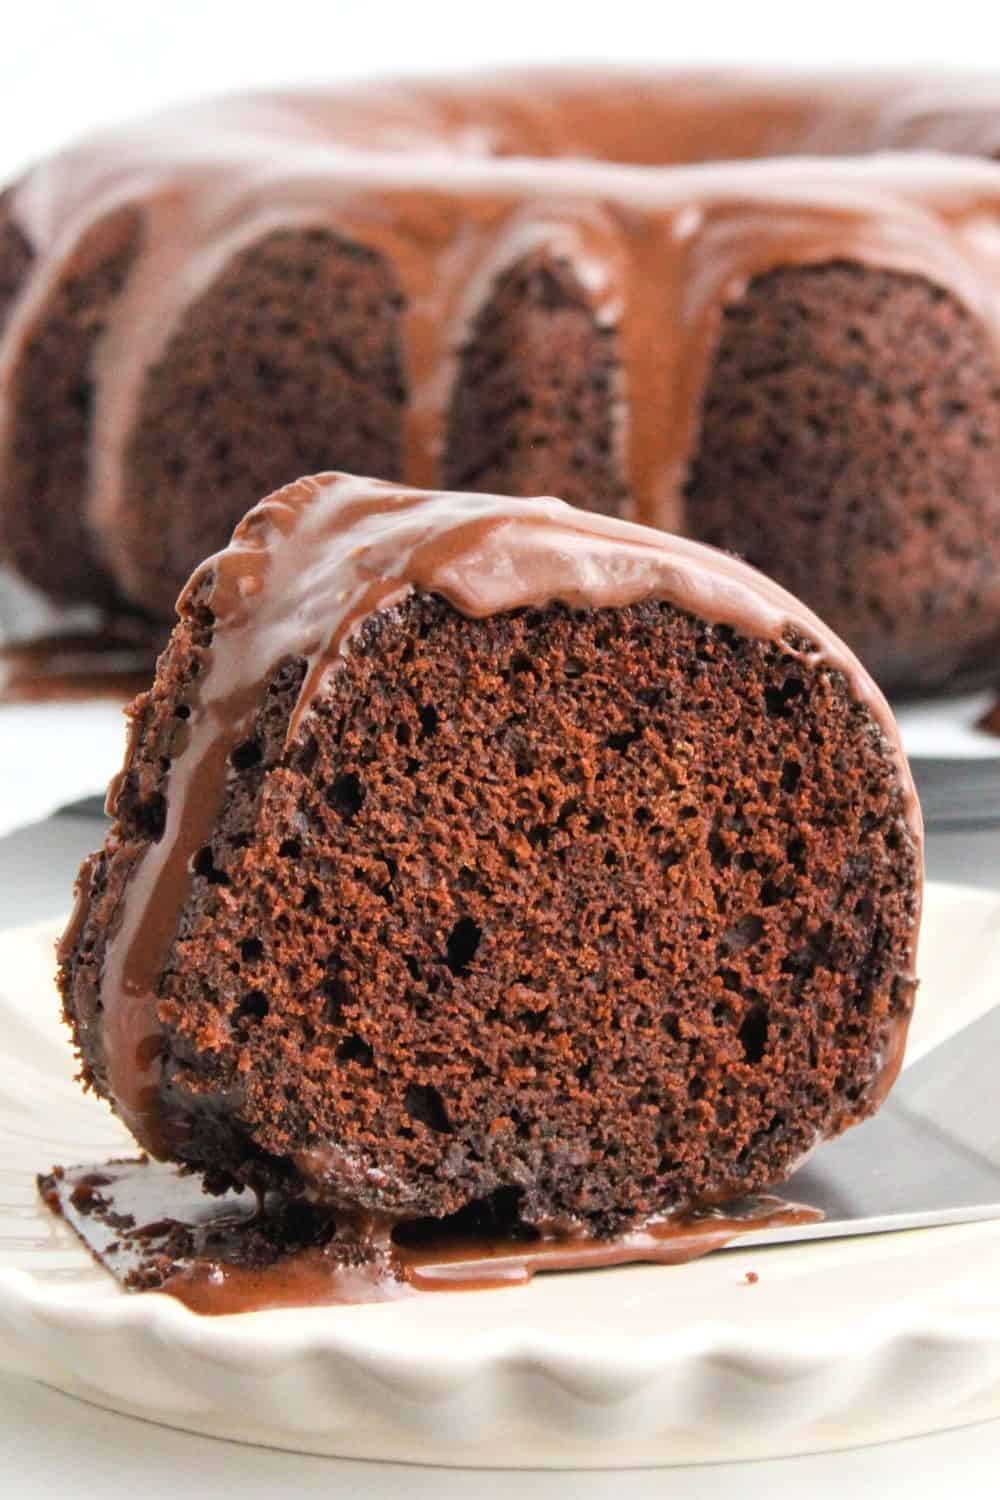 close-up view of a slice of chocolate fudge cake, with the remaining bundt cake in the background